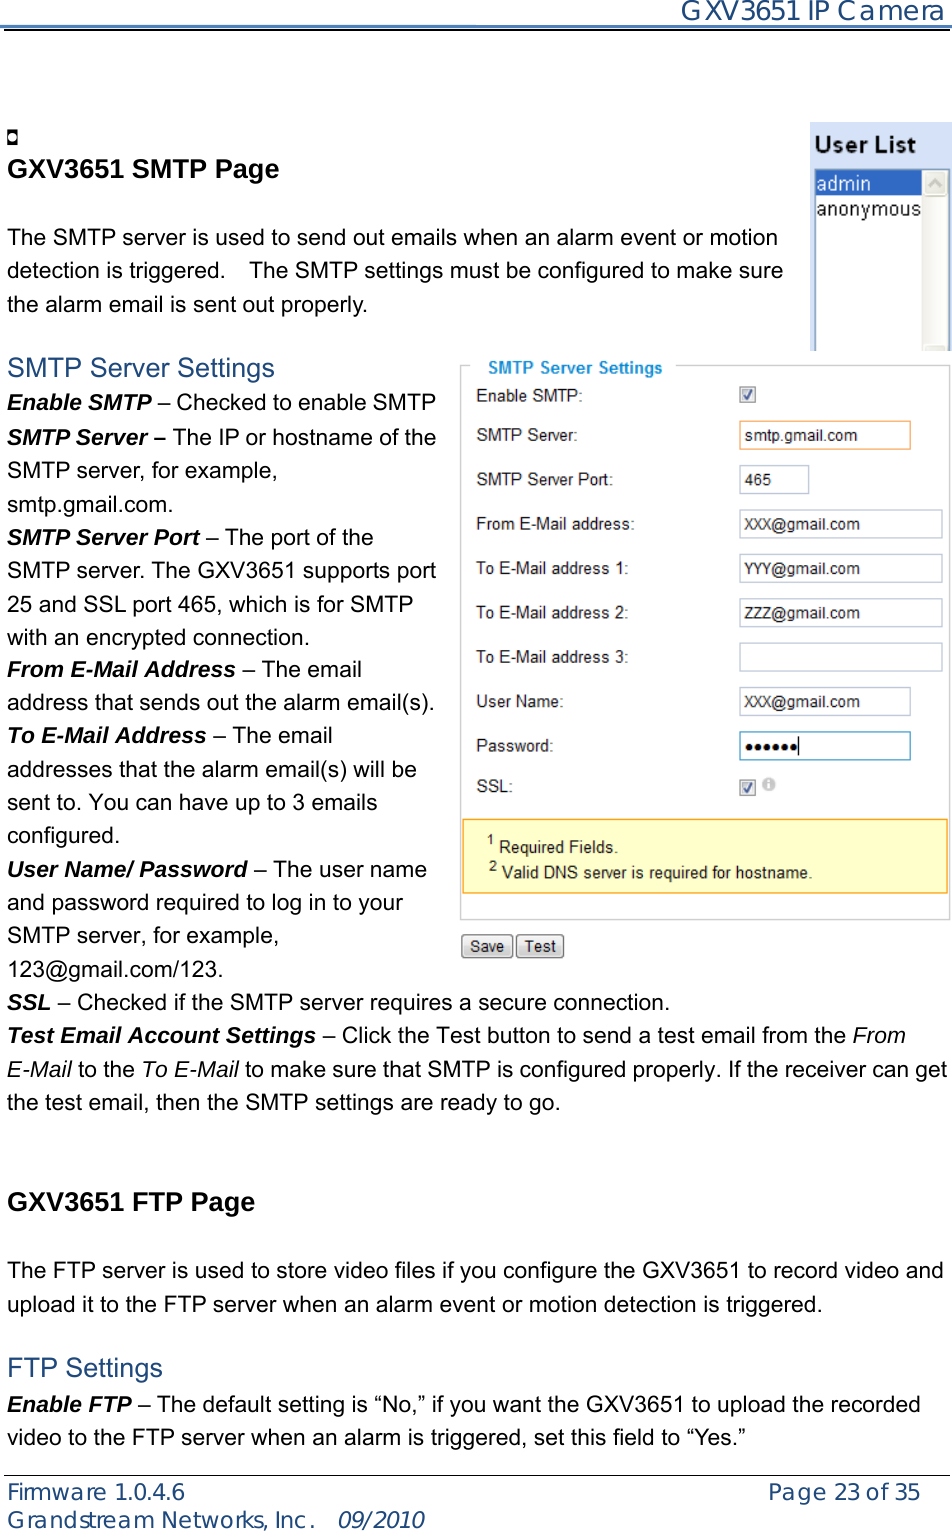     GXV3651 IP Camera Firmware 1.0.4.6                                                   Page 23 of 35    Grandstream Networks, Inc.  09/2010     GXV3651 SMTP Page  The SMTP server is used to send out emails when an alarm event or motion detection is triggered.    The SMTP settings must be configured to make sure the alarm email is sent out properly.  SMTP Server Settings Enable SMTP – Checked to enable SMTP SMTP Server – The IP or hostname of the SMTP server, for example, smtp.gmail.com. SMTP Server Port – The port of the SMTP server. The GXV3651 supports port 25 and SSL port 465, which is for SMTP with an encrypted connection. From E-Mail Address – The email address that sends out the alarm email(s). To E-Mail Address – The email addresses that the alarm email(s) will be sent to. You can have up to 3 emails configured. User Name/ Password – The user name and password required to log in to your SMTP server, for example, 123@gmail.com/123. SSL – Checked if the SMTP server requires a secure connection. Test Email Account Settings – Click the Test button to send a test email from the From E-Mail to the To E-Mail to make sure that SMTP is configured properly. If the receiver can get the test email, then the SMTP settings are ready to go.     GXV3651 FTP Page  The FTP server is used to store video files if you configure the GXV3651 to record video and upload it to the FTP server when an alarm event or motion detection is triggered.  FTP Settings Enable FTP – The default setting is “No,” if you want the GXV3651 to upload the recorded video to the FTP server when an alarm is triggered, set this field to “Yes.” 